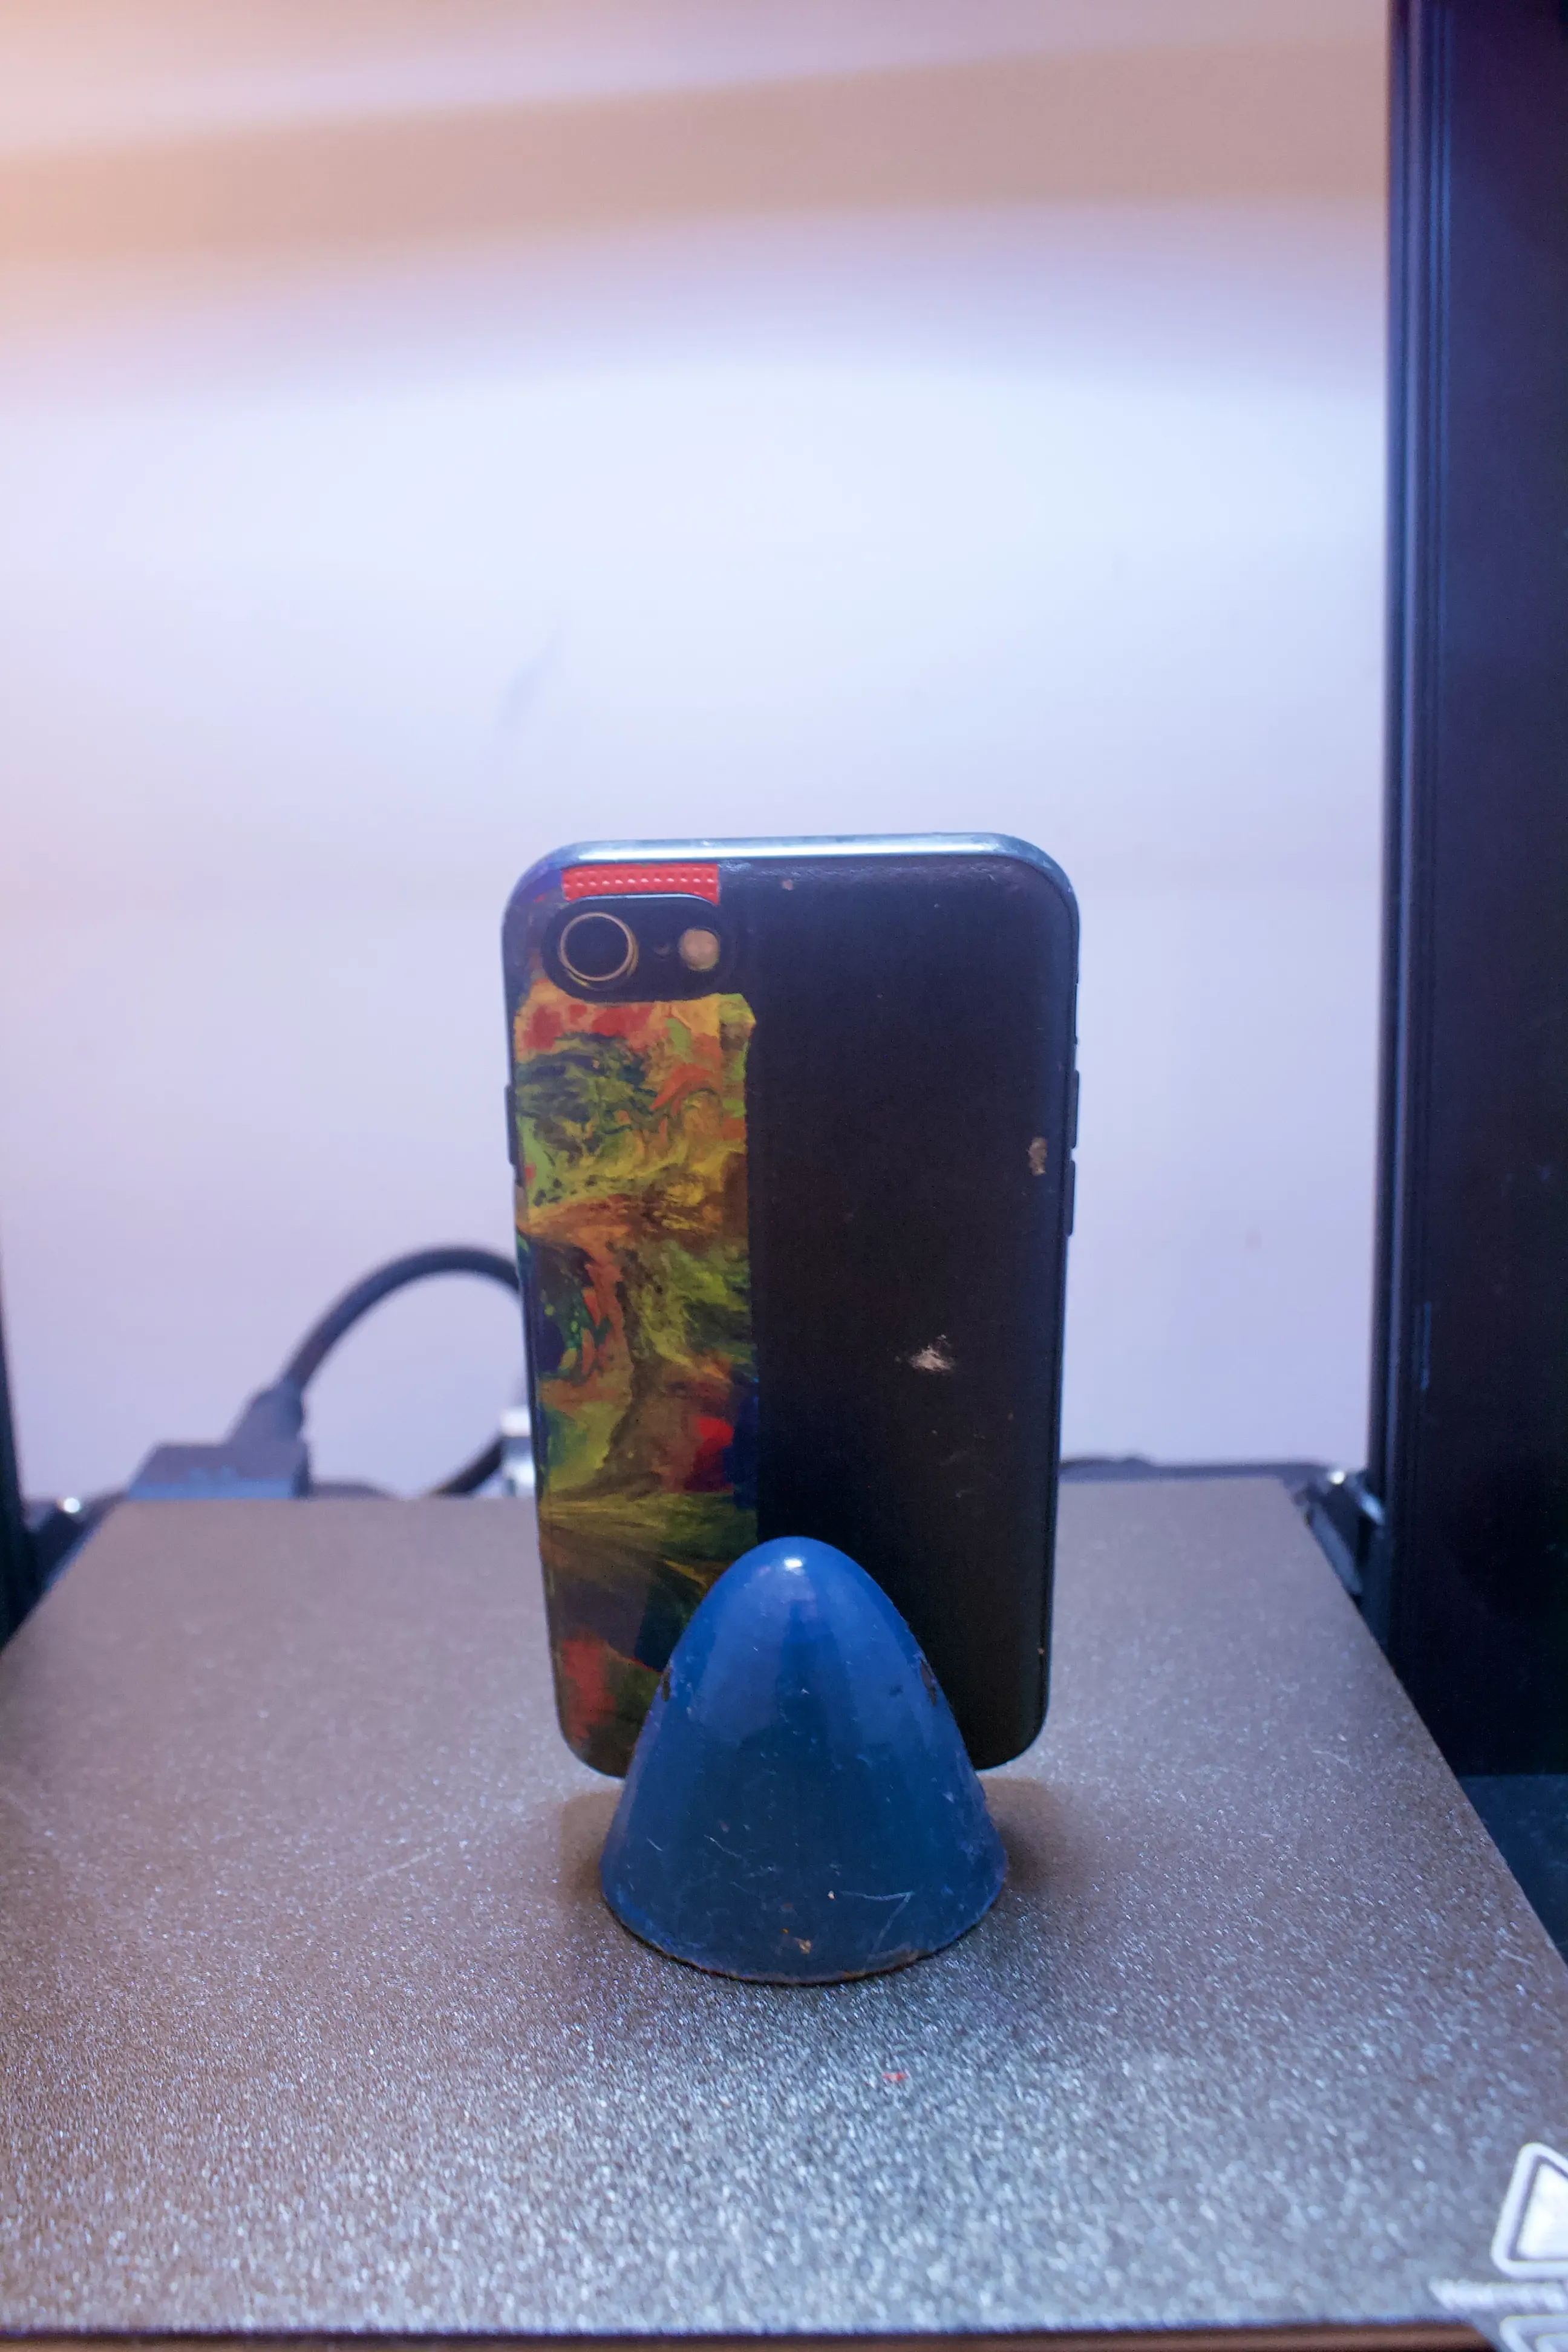 Shark phone stand (also works with ipads and tablets)